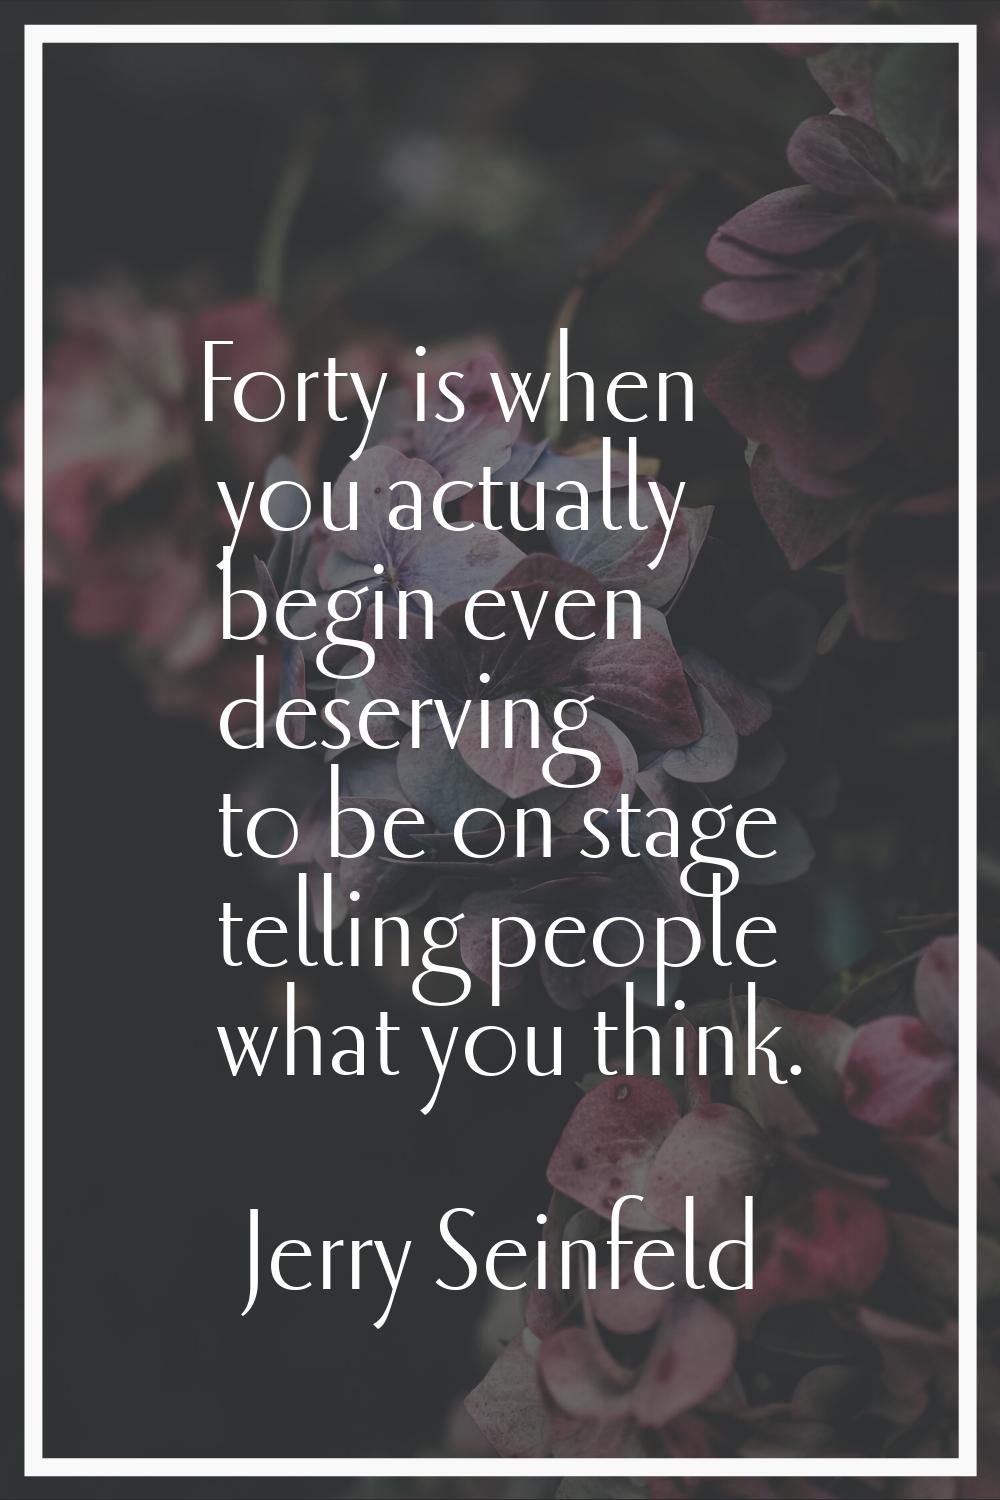 Forty is when you actually begin even deserving to be on stage telling people what you think.